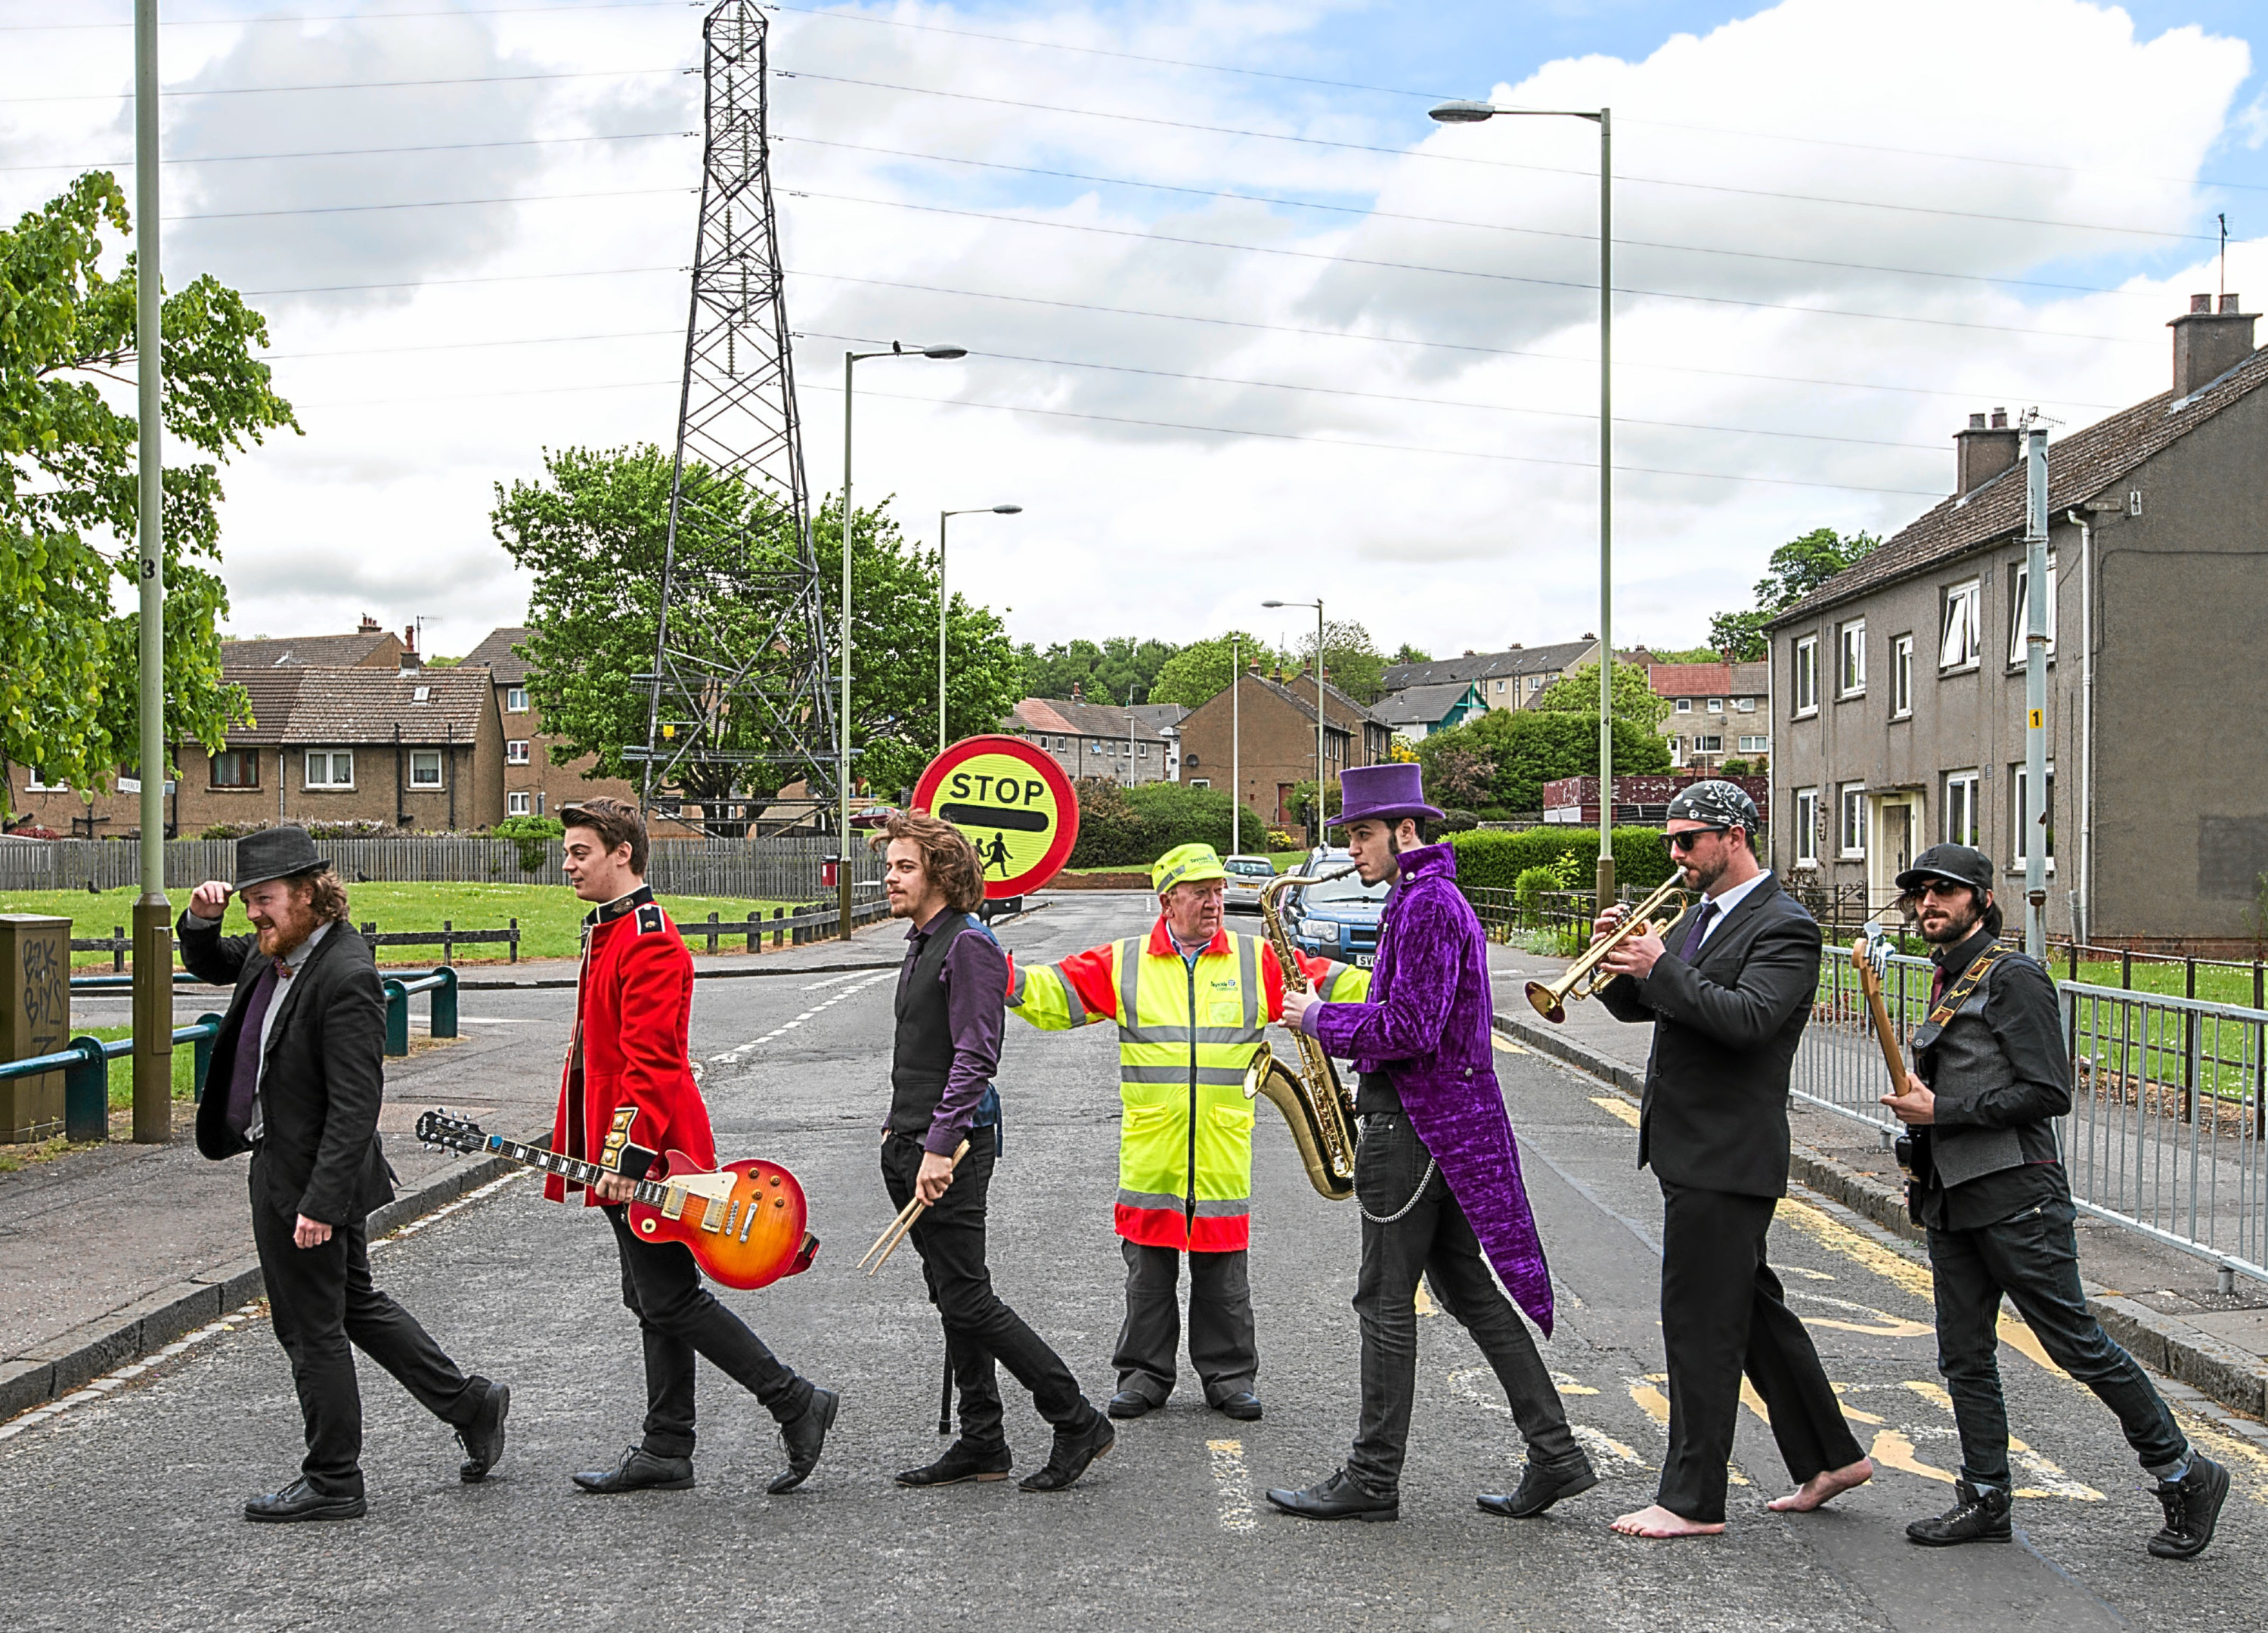 The Purple Felts will be showcasing their talents in Inverness next month.